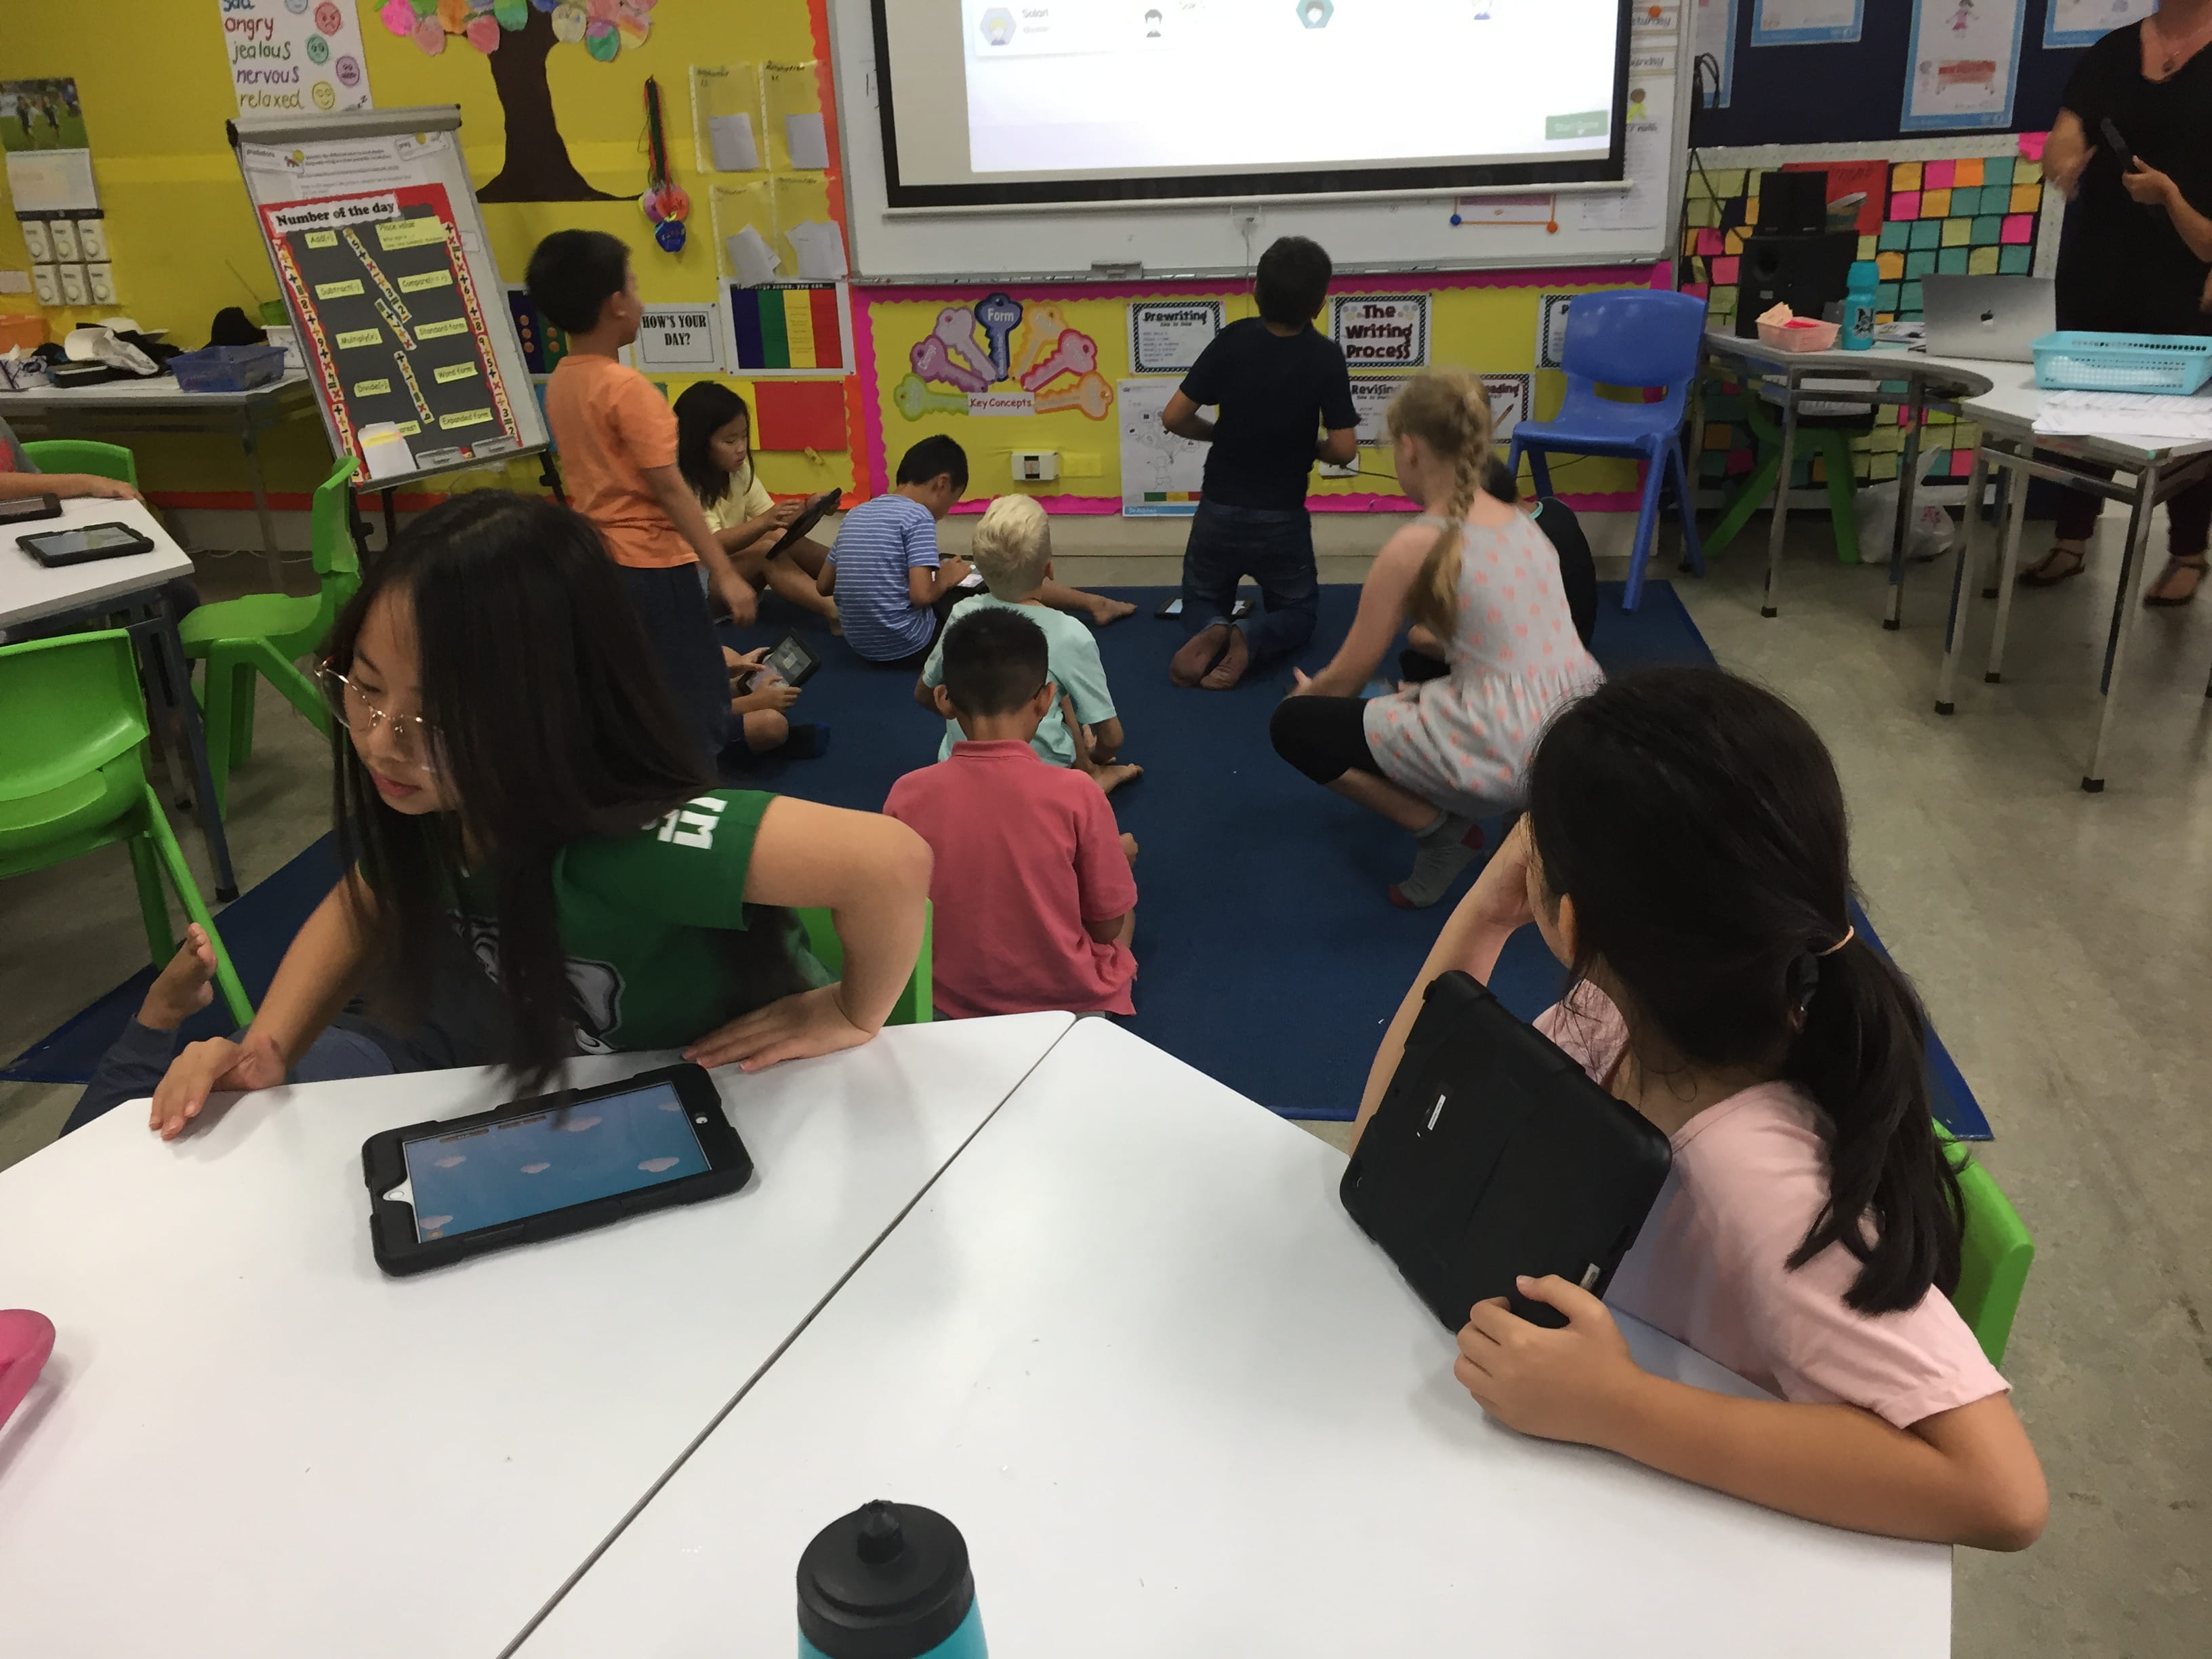 Northbridge teachers are constantly updating their ICT skills to support our digital native students - northbridge-teachers-are-constantly-updating-their-ict-skills-to-support-our-digital-native-students